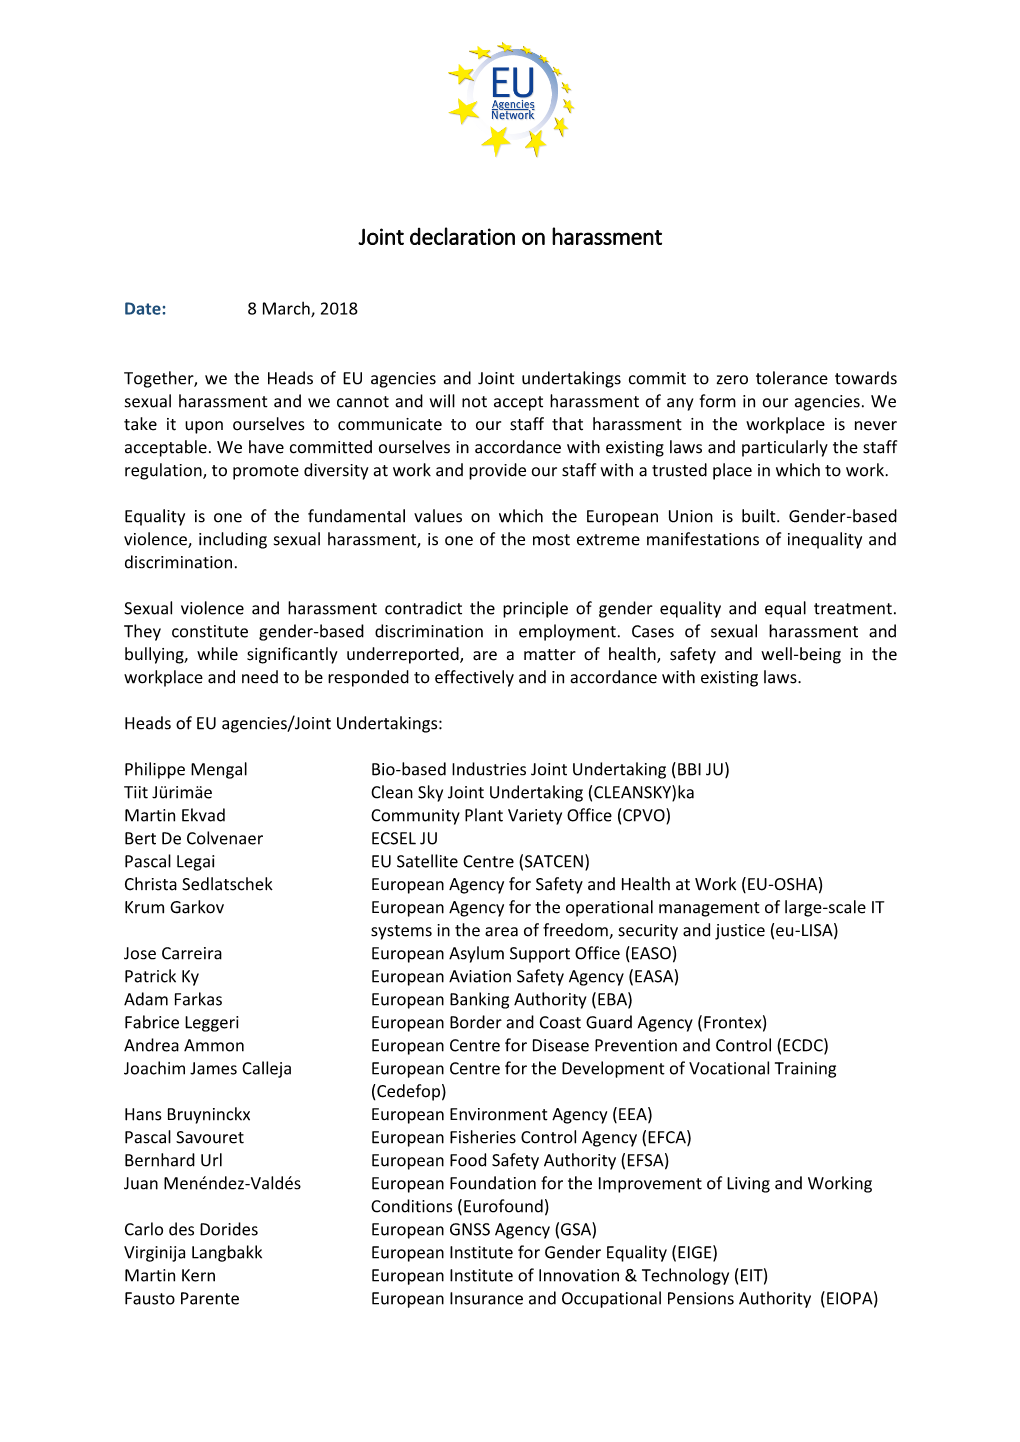 Joint Declaration on Harassment